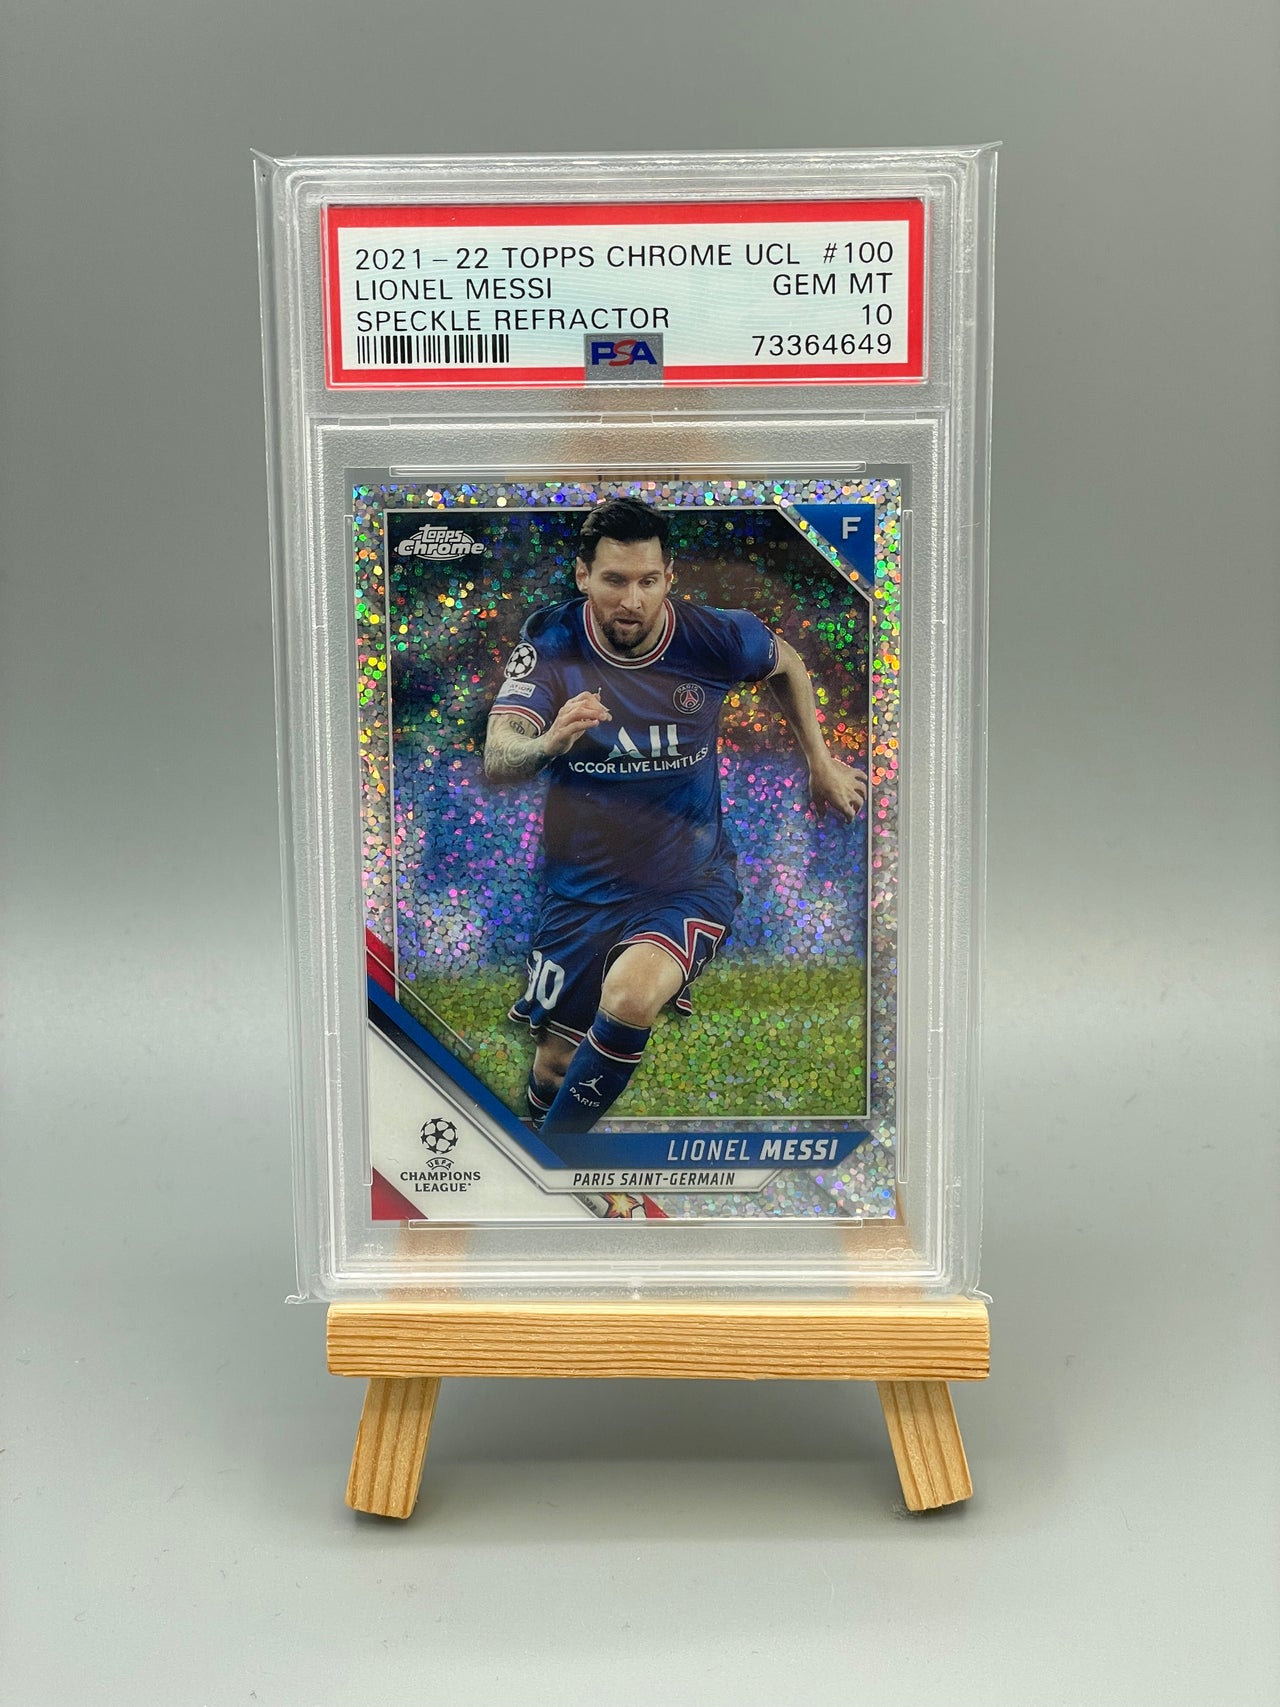 Fussball -  Topps - Chrome UCL - Messi Speckle Refractor PSA 10